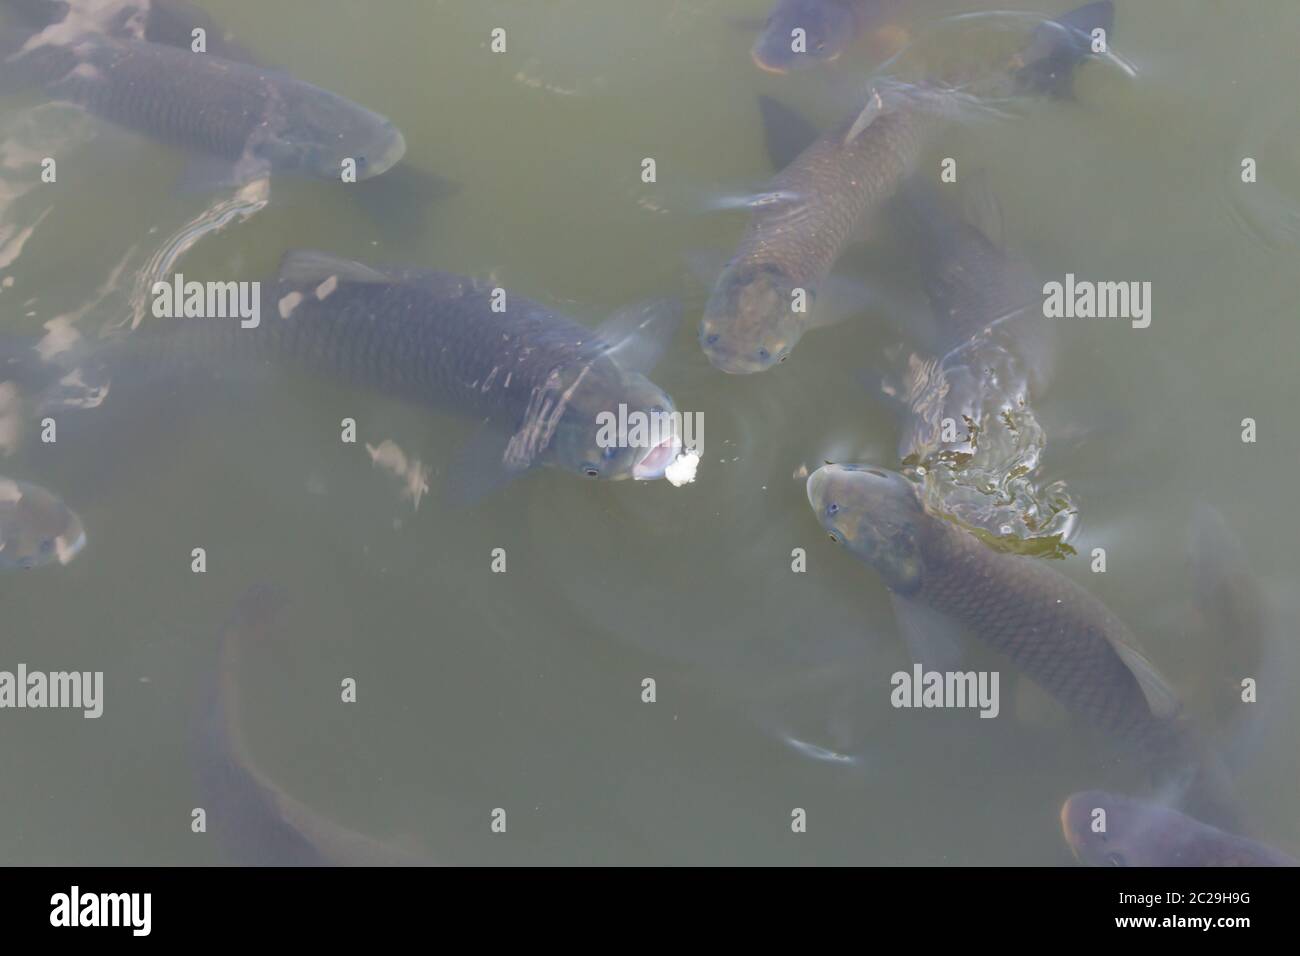 Carps eating bread in a lake Stock Photo